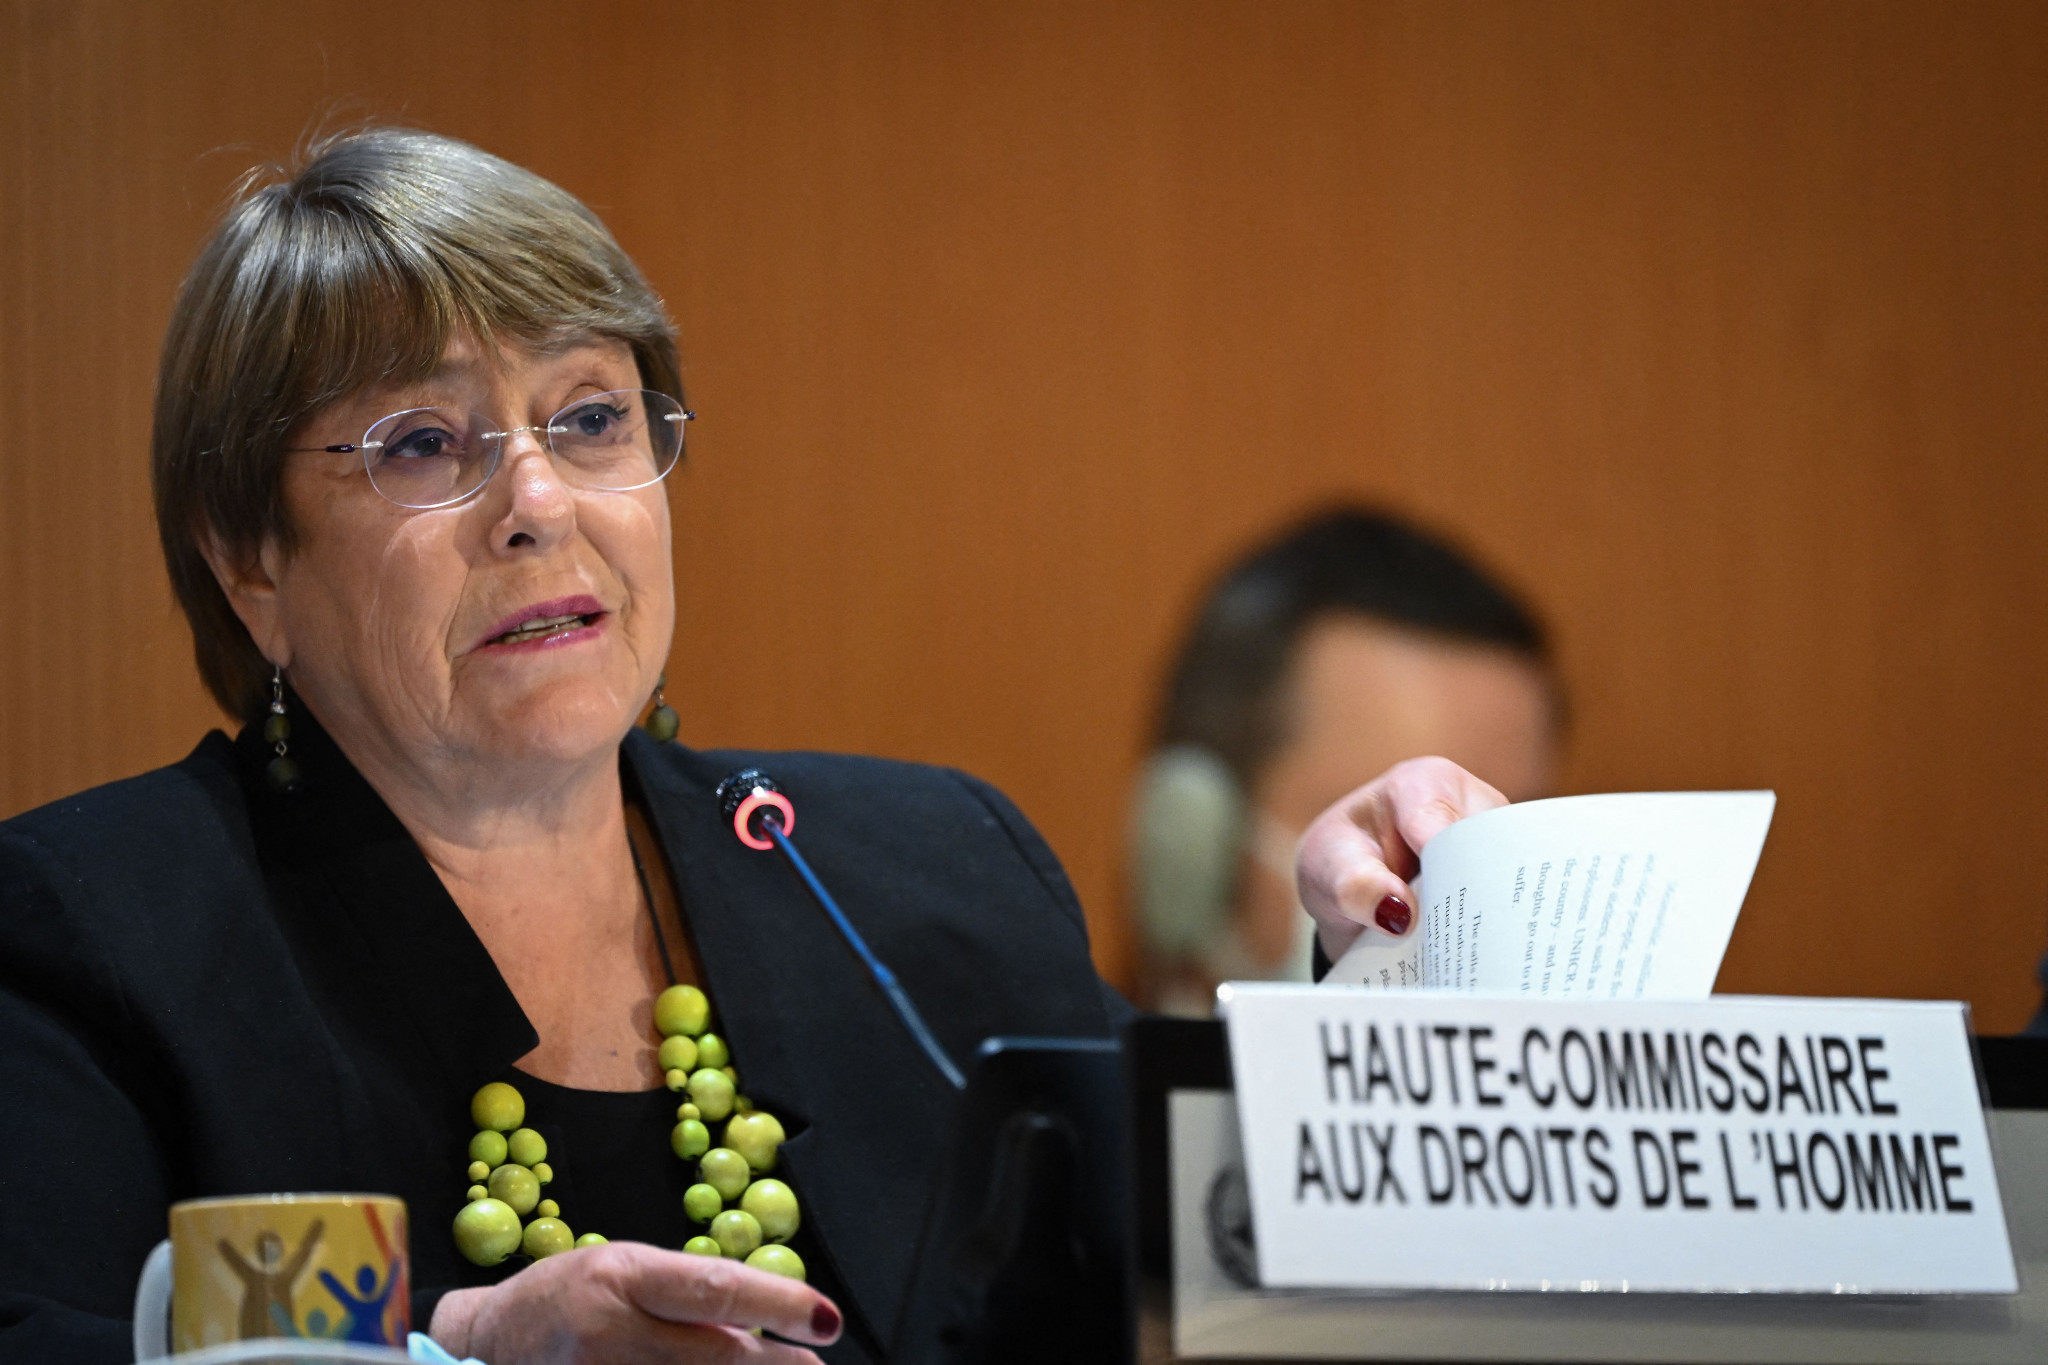 Activists castigate Bachelet for inaction prior to Beijing 2022